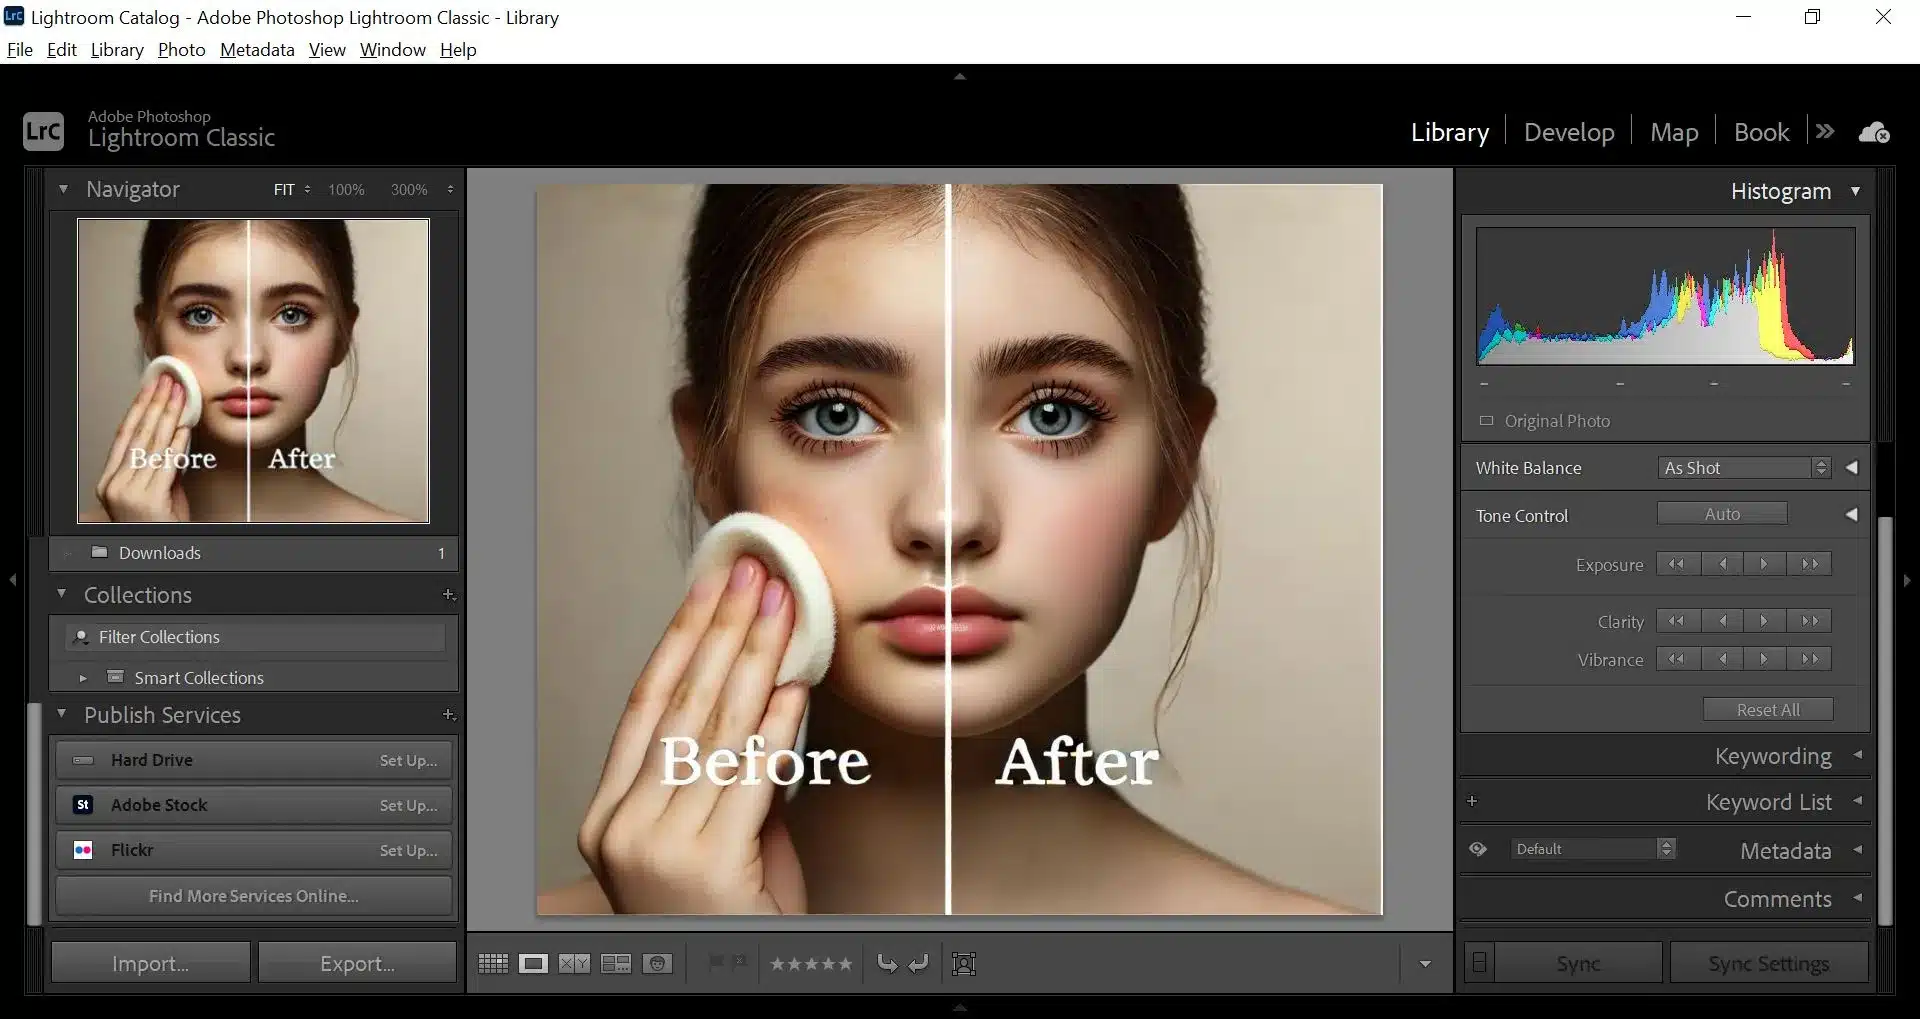 Adobe Lr interface displaying a before and after comparison of a girl's portrait with skin softening edits. The editing tools and panels, including the histogram and tone control, are visible.